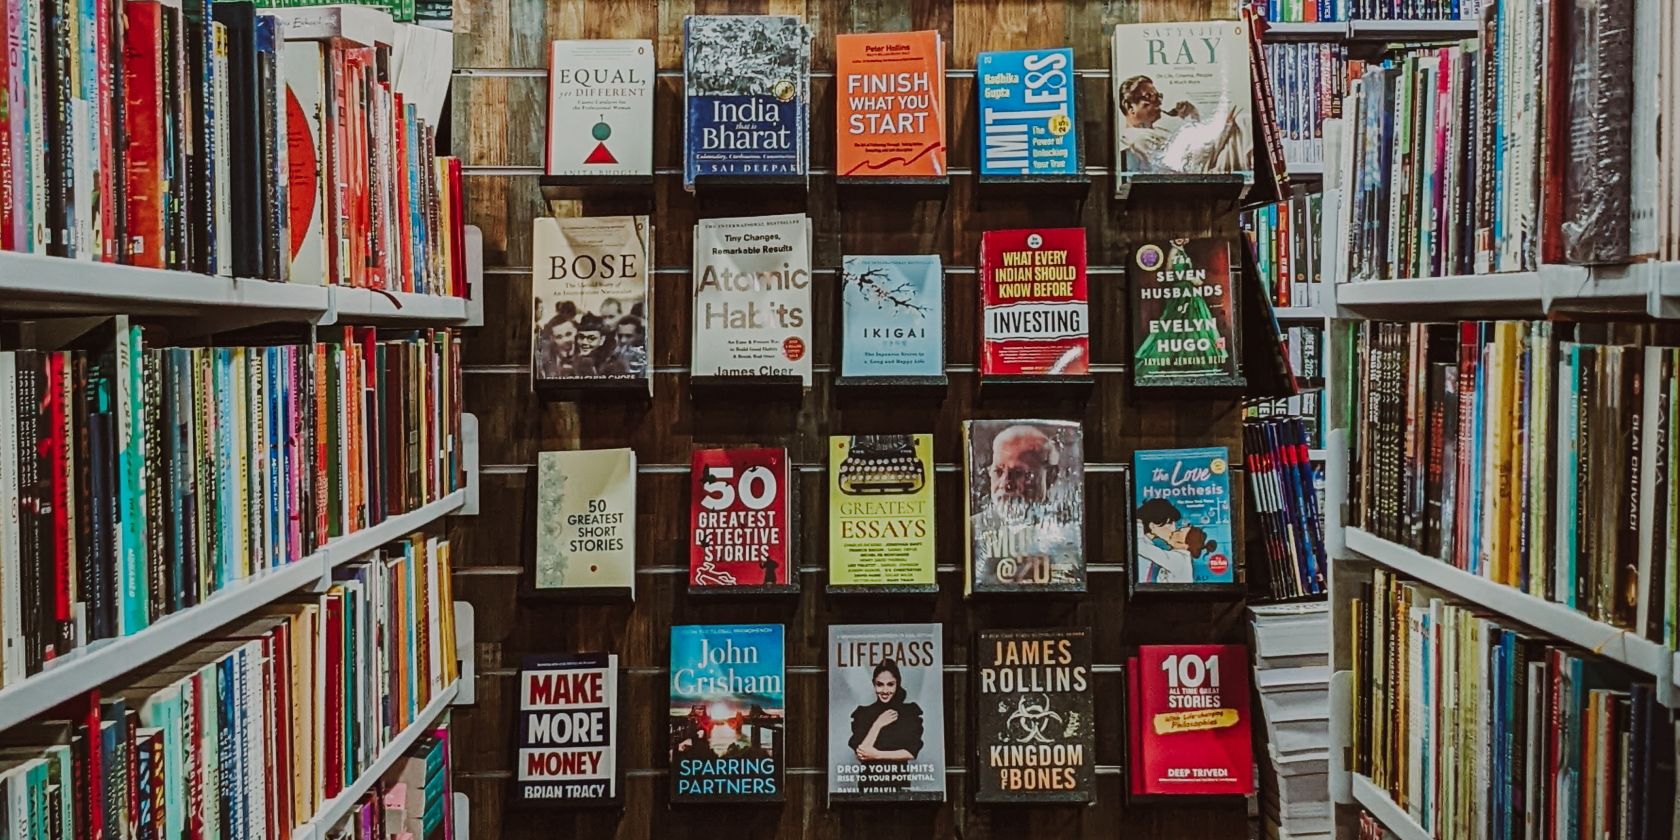 Books on Display in a Bookstore Photo